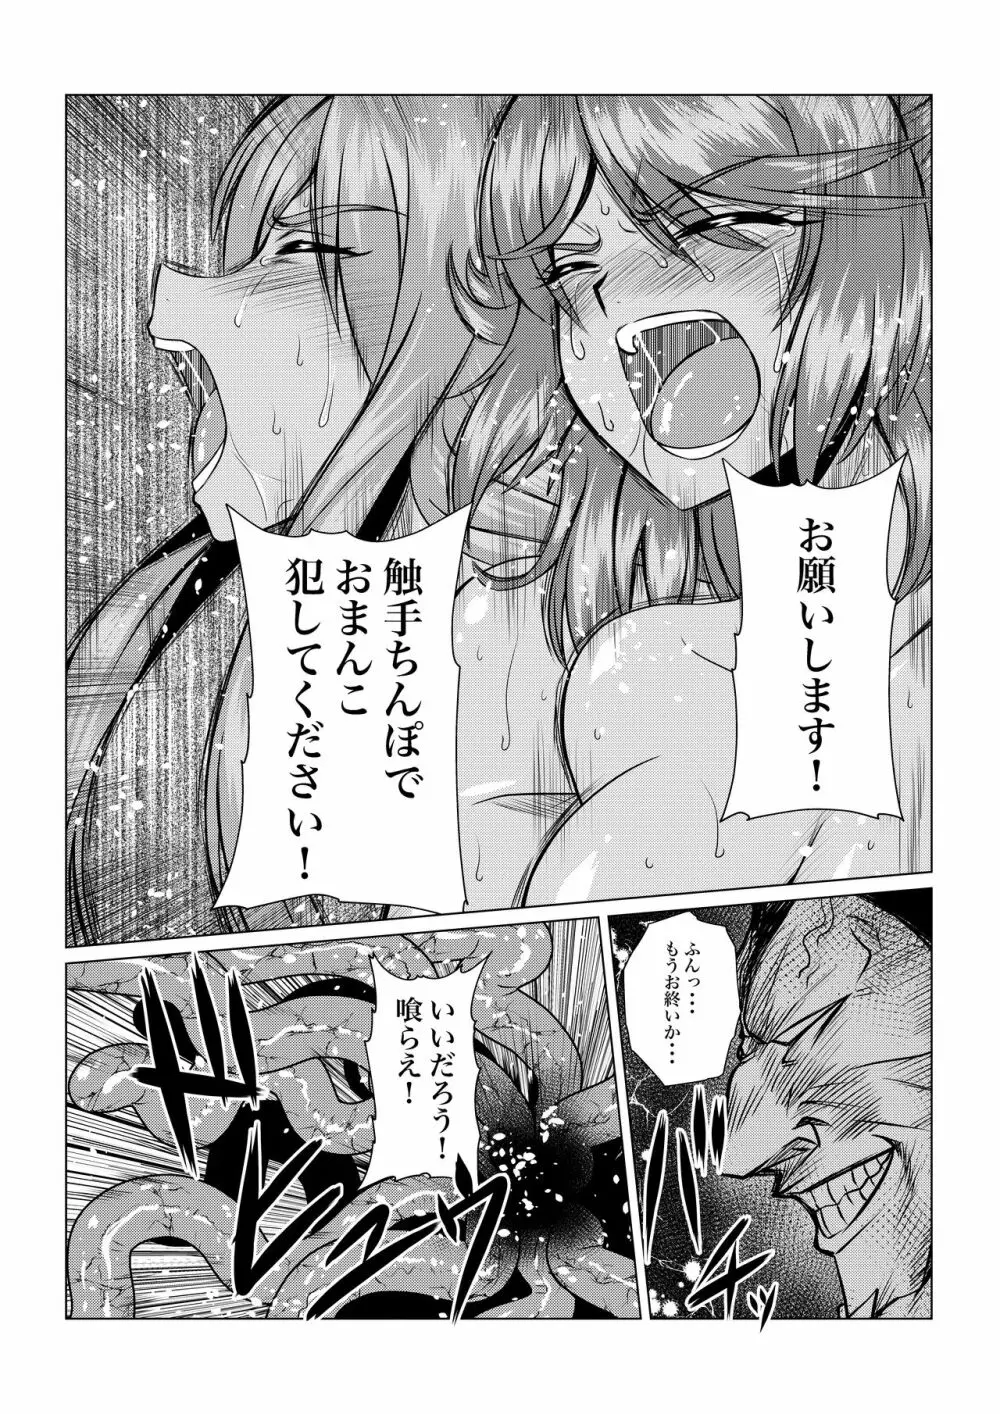 Tales Of DarkSide〜三散華〜 - page15